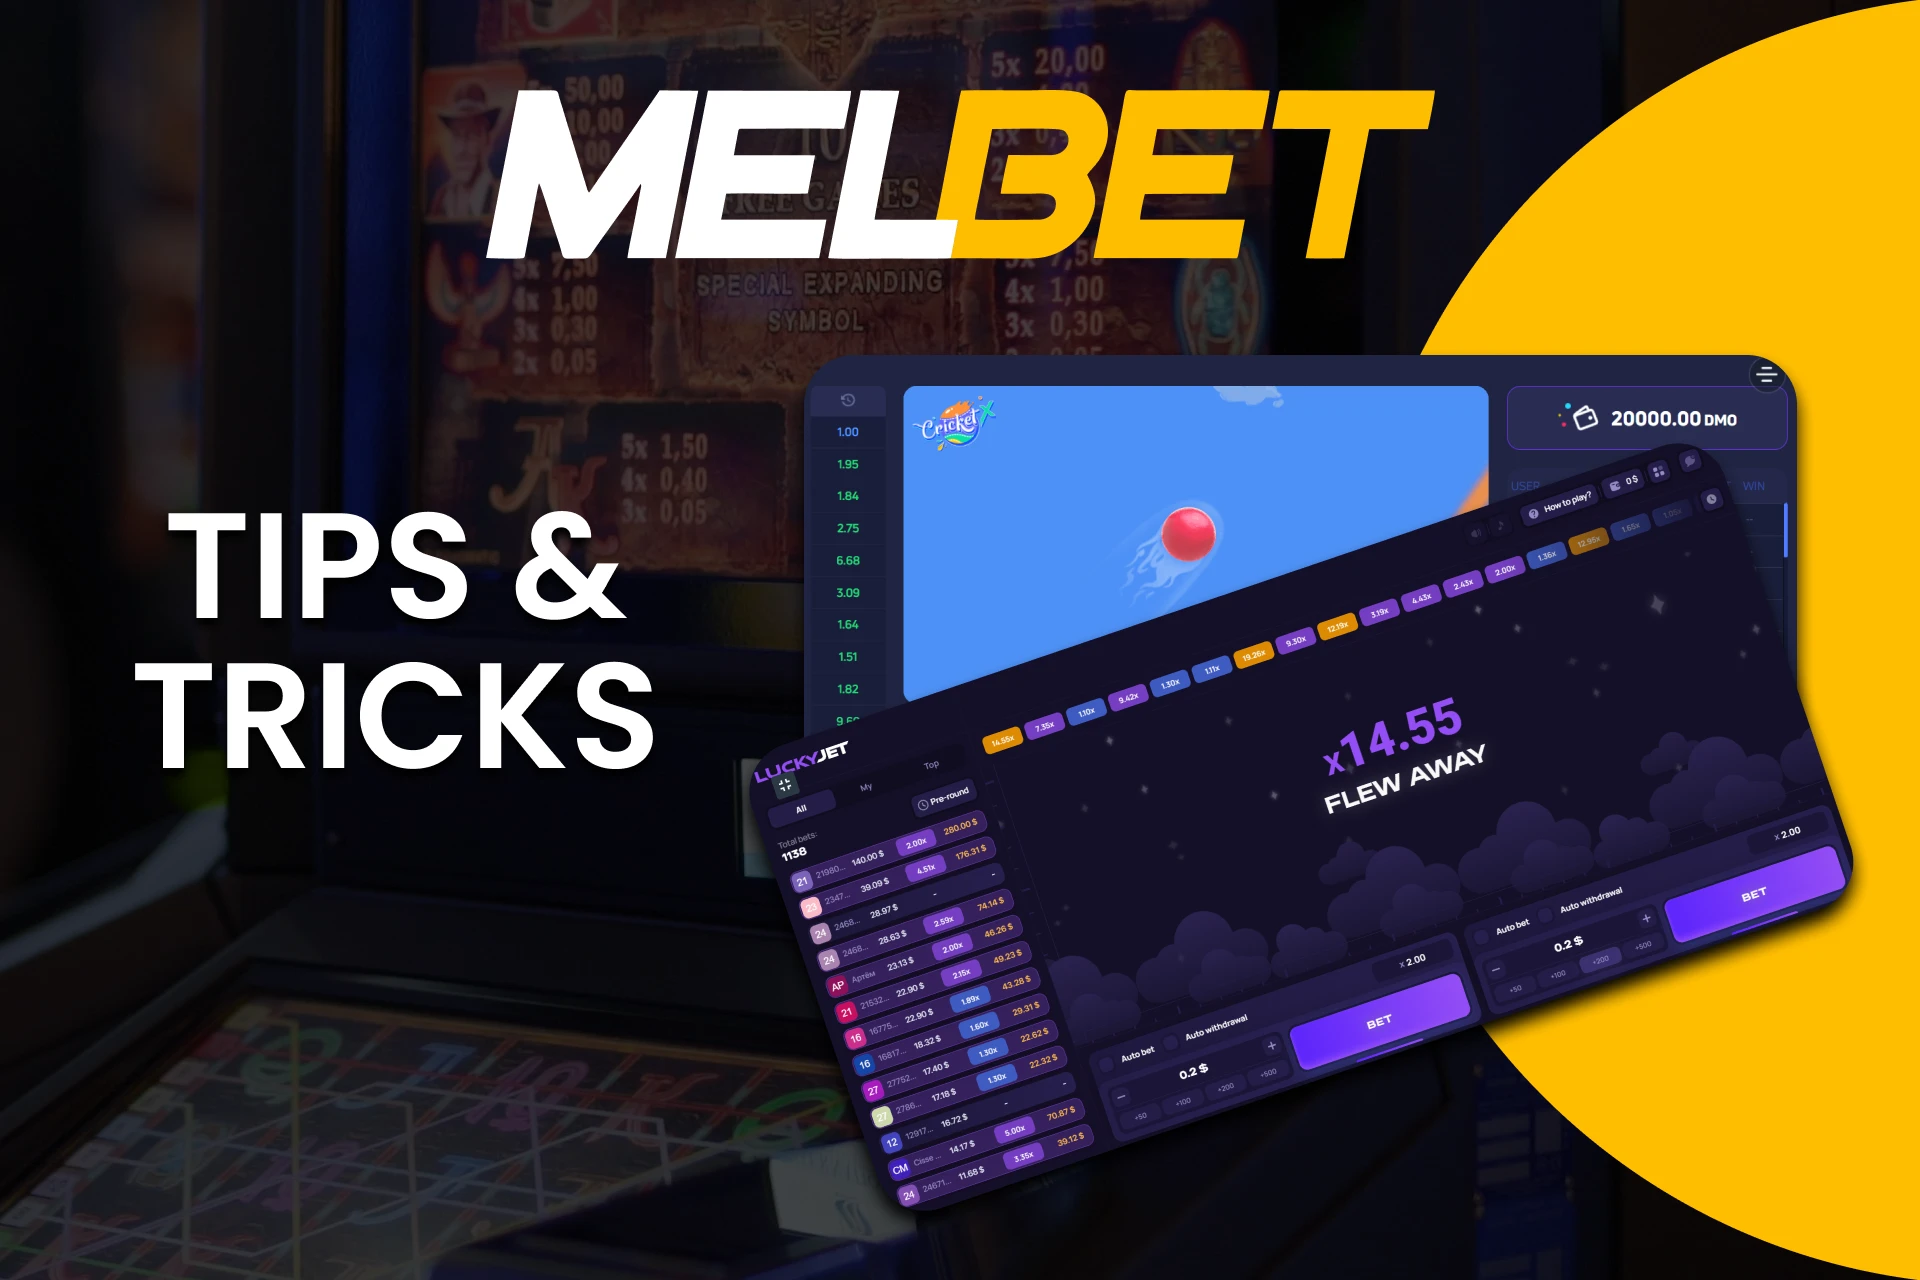 Learn different tactics to win crash games on Melbet.